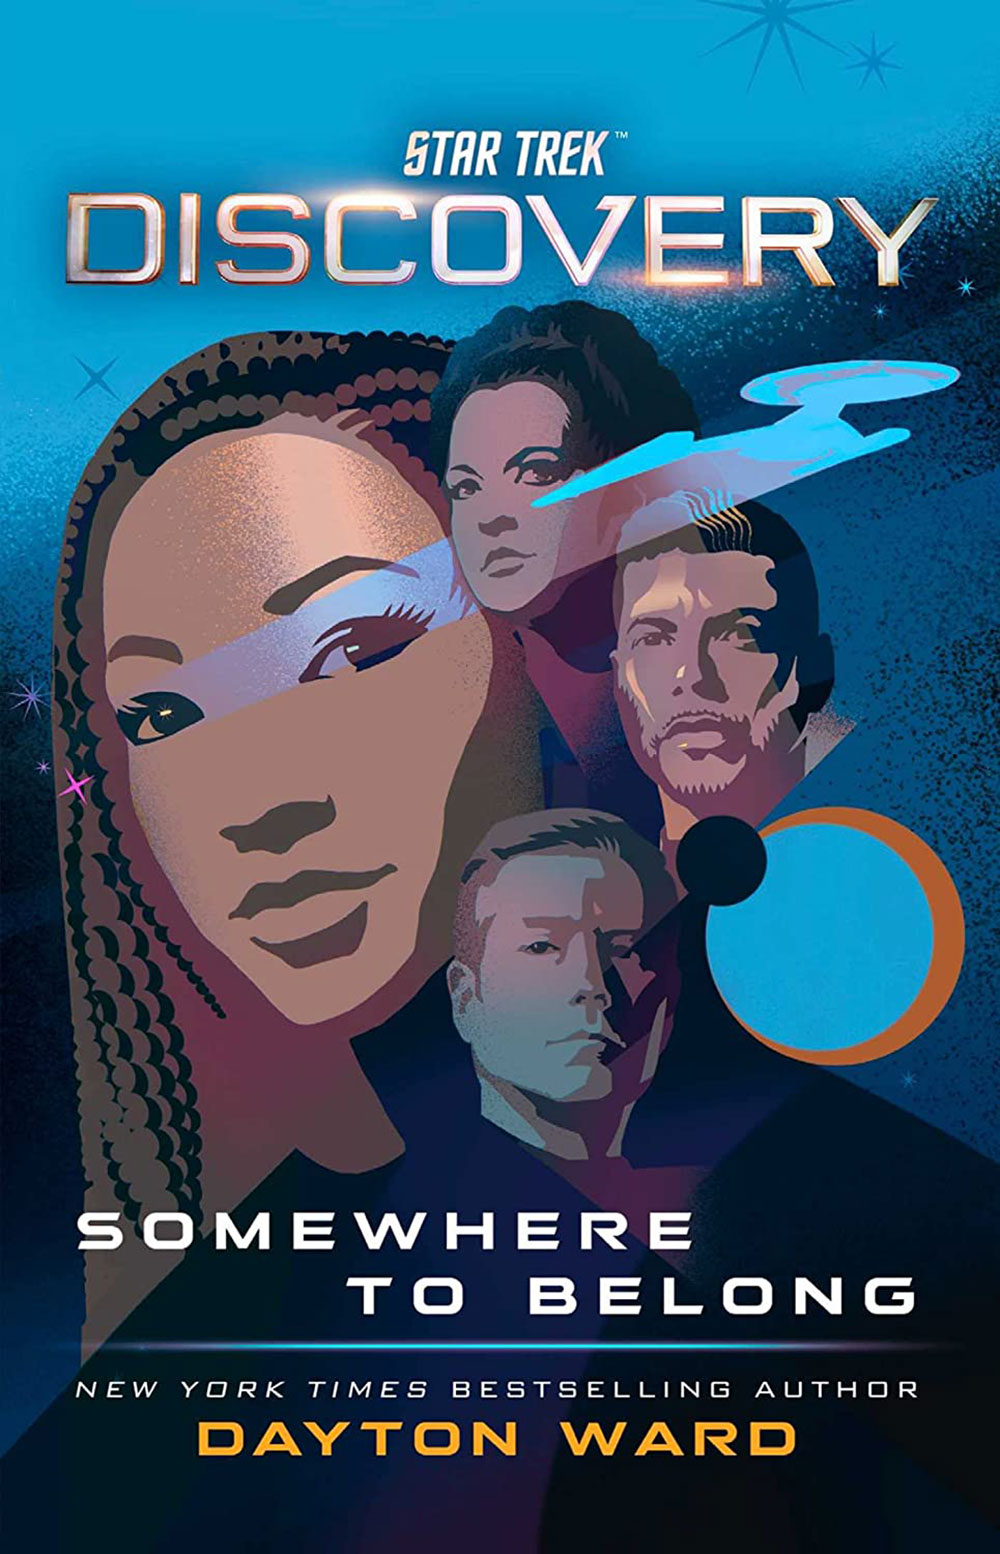 ‘Star Trek: Discovery – Somewhere to Belong’ book cover